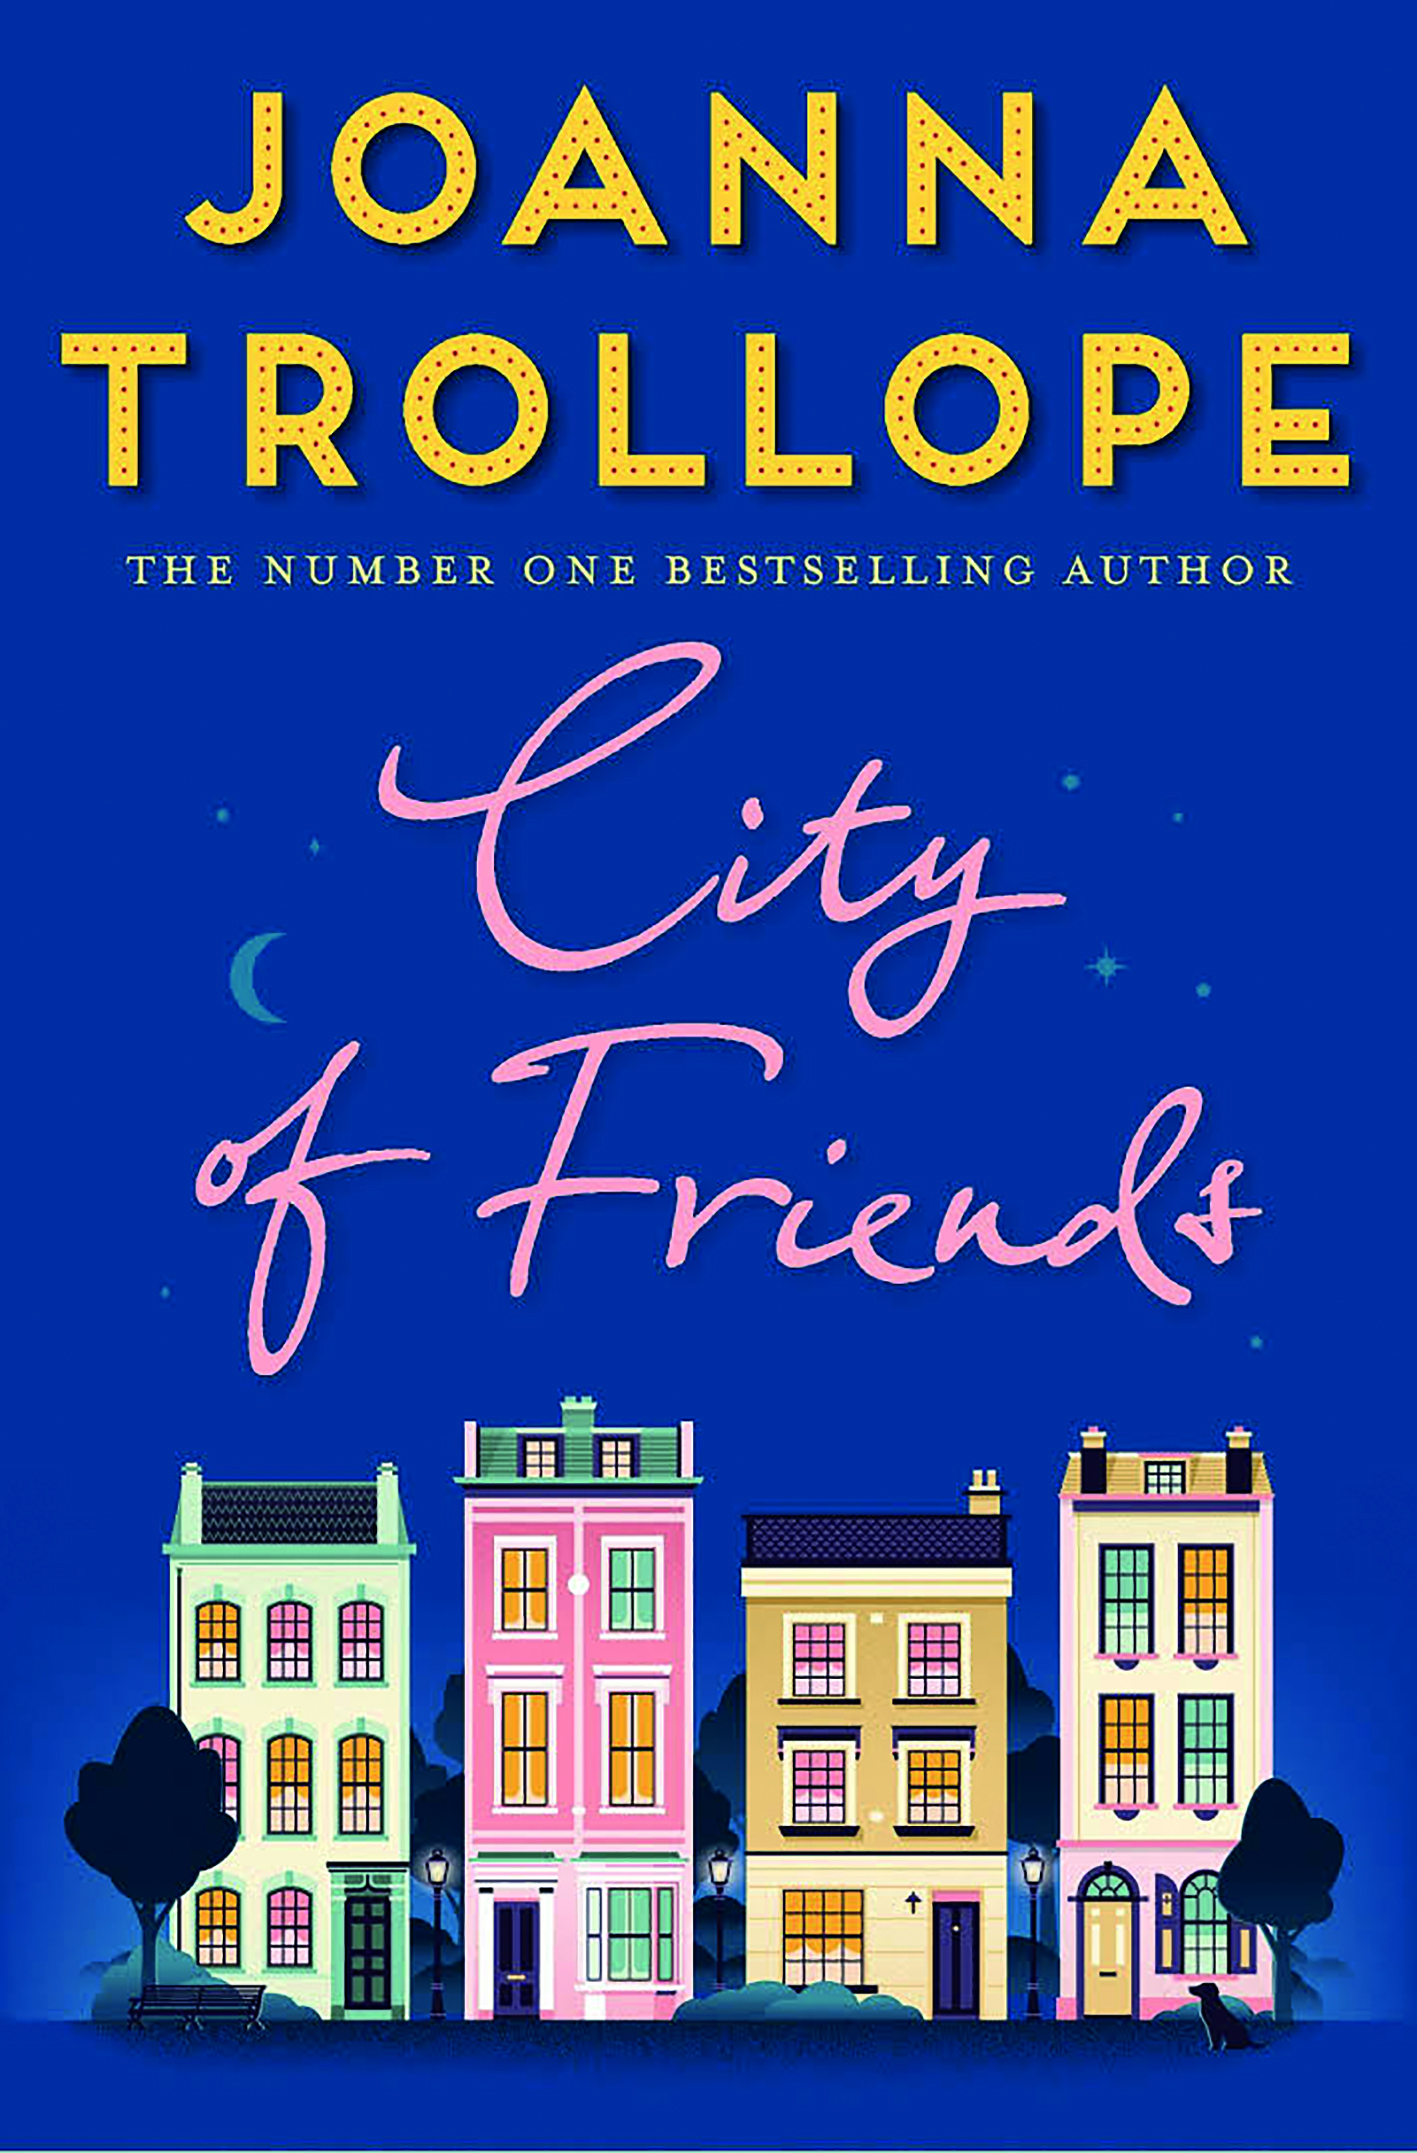 Interview with Bestselling Author Joanna Trollope